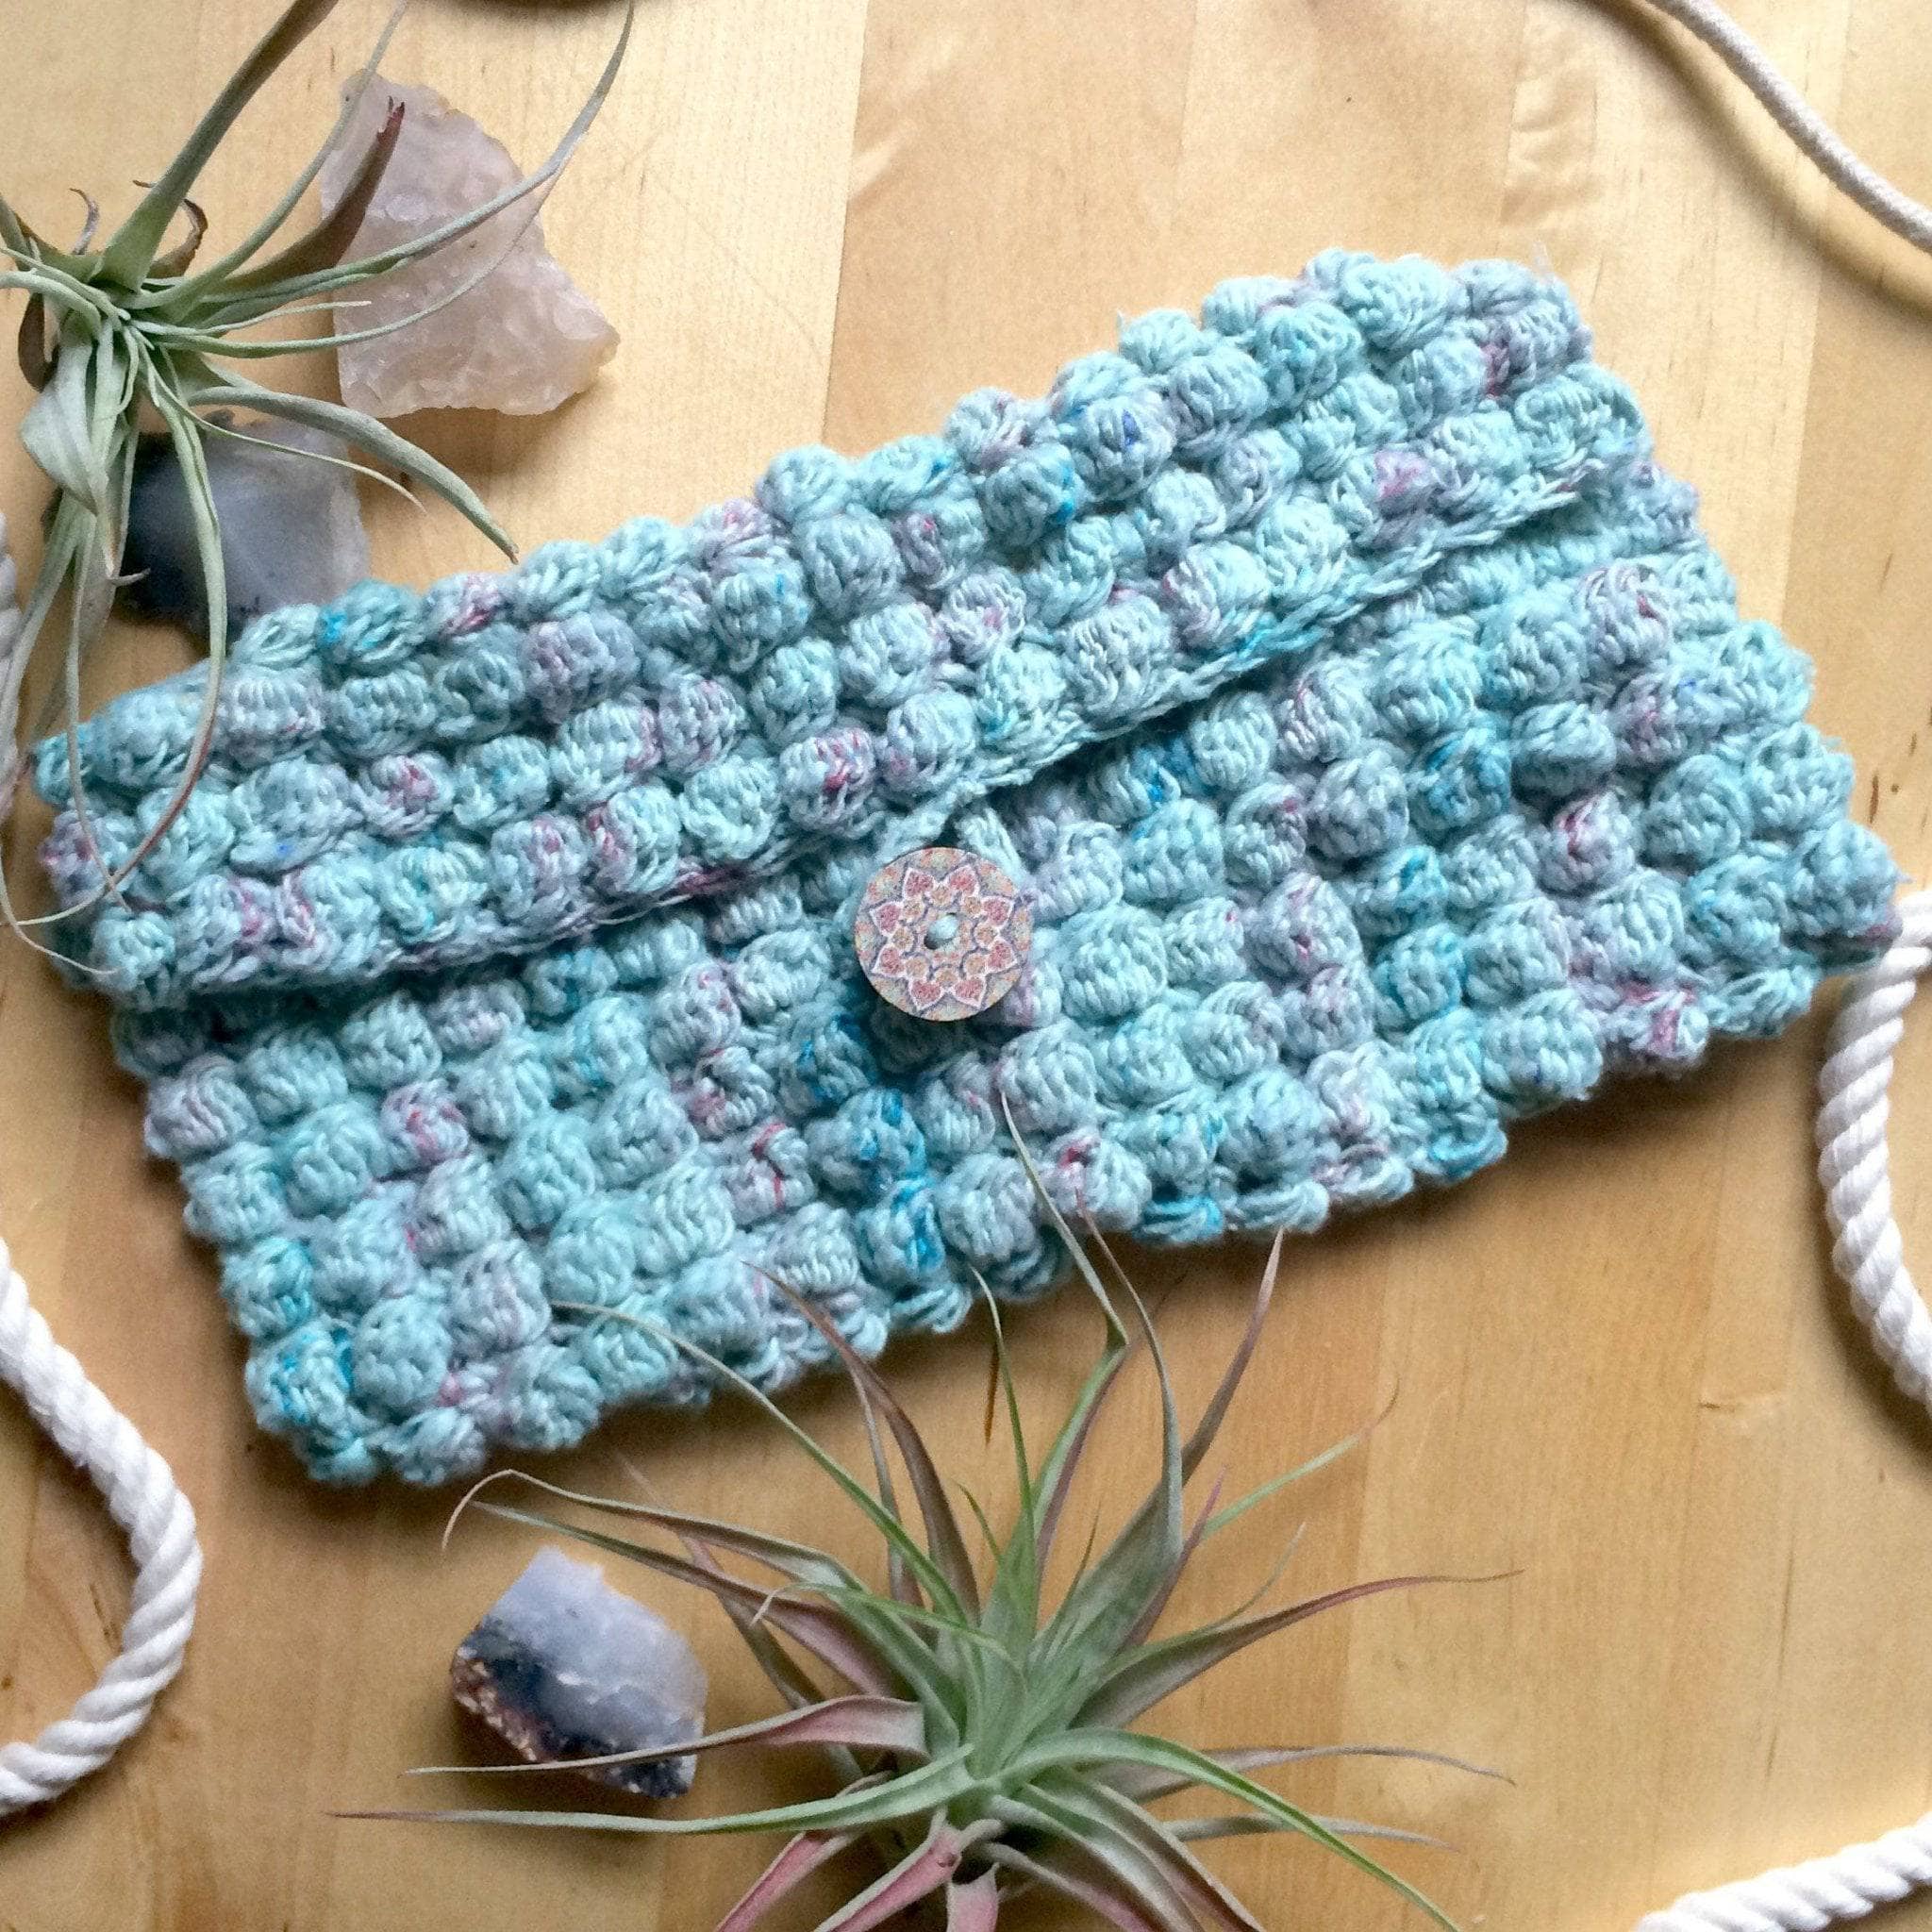 CROCHET PATTERN, the Sutton Crochet Bag in 2 Sizes, Youtube Tutorial  Included for Making the Top Trim, Crochet Bag Pattern, Crochet Pattern -  Etsy